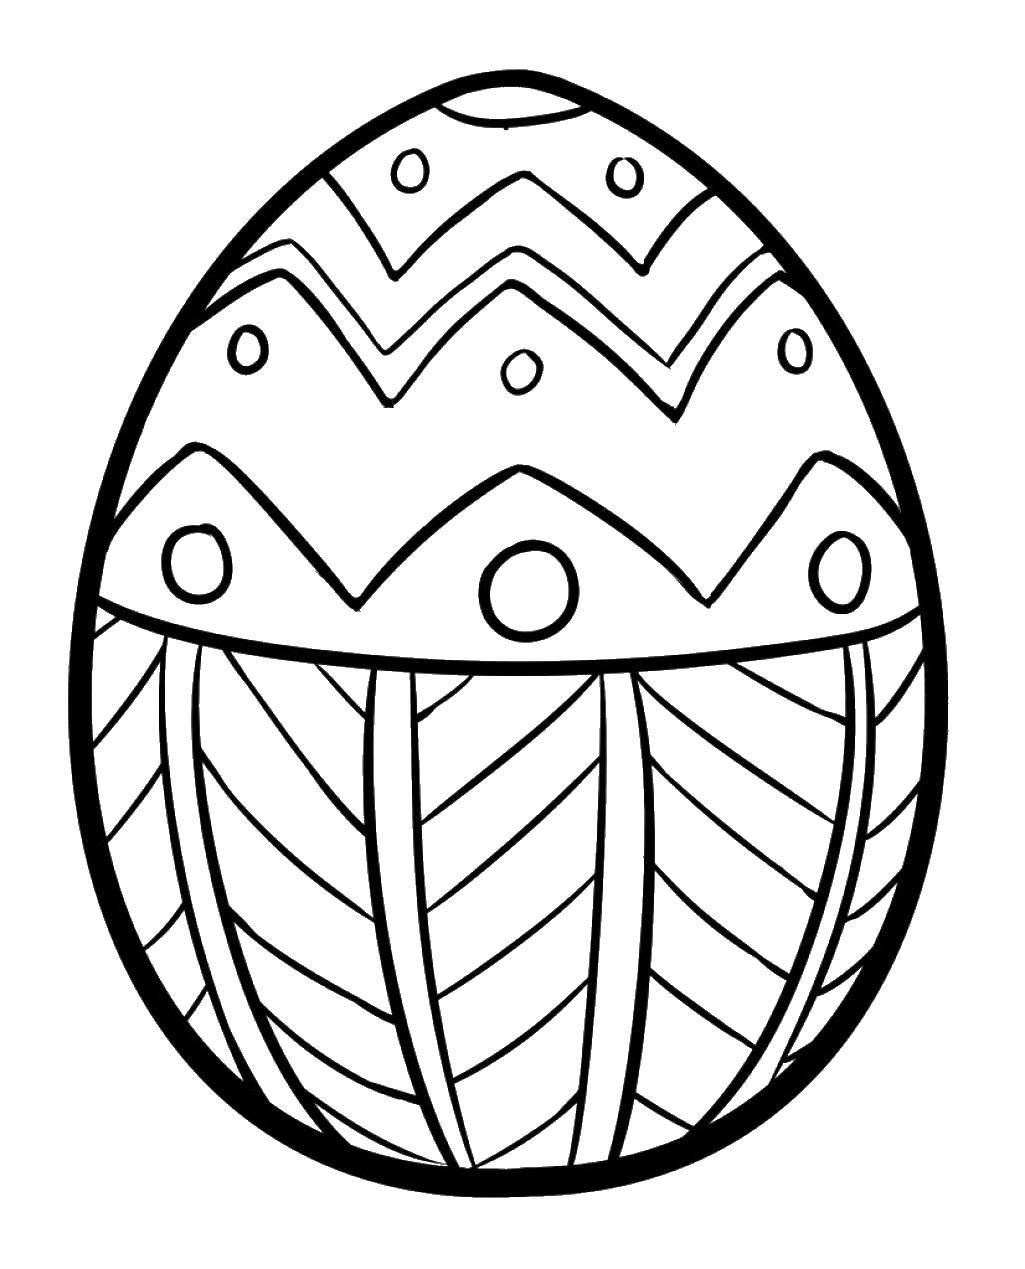 Coloring Egg. Category Easter eggs. Tags:  Easter, holiday, egg.